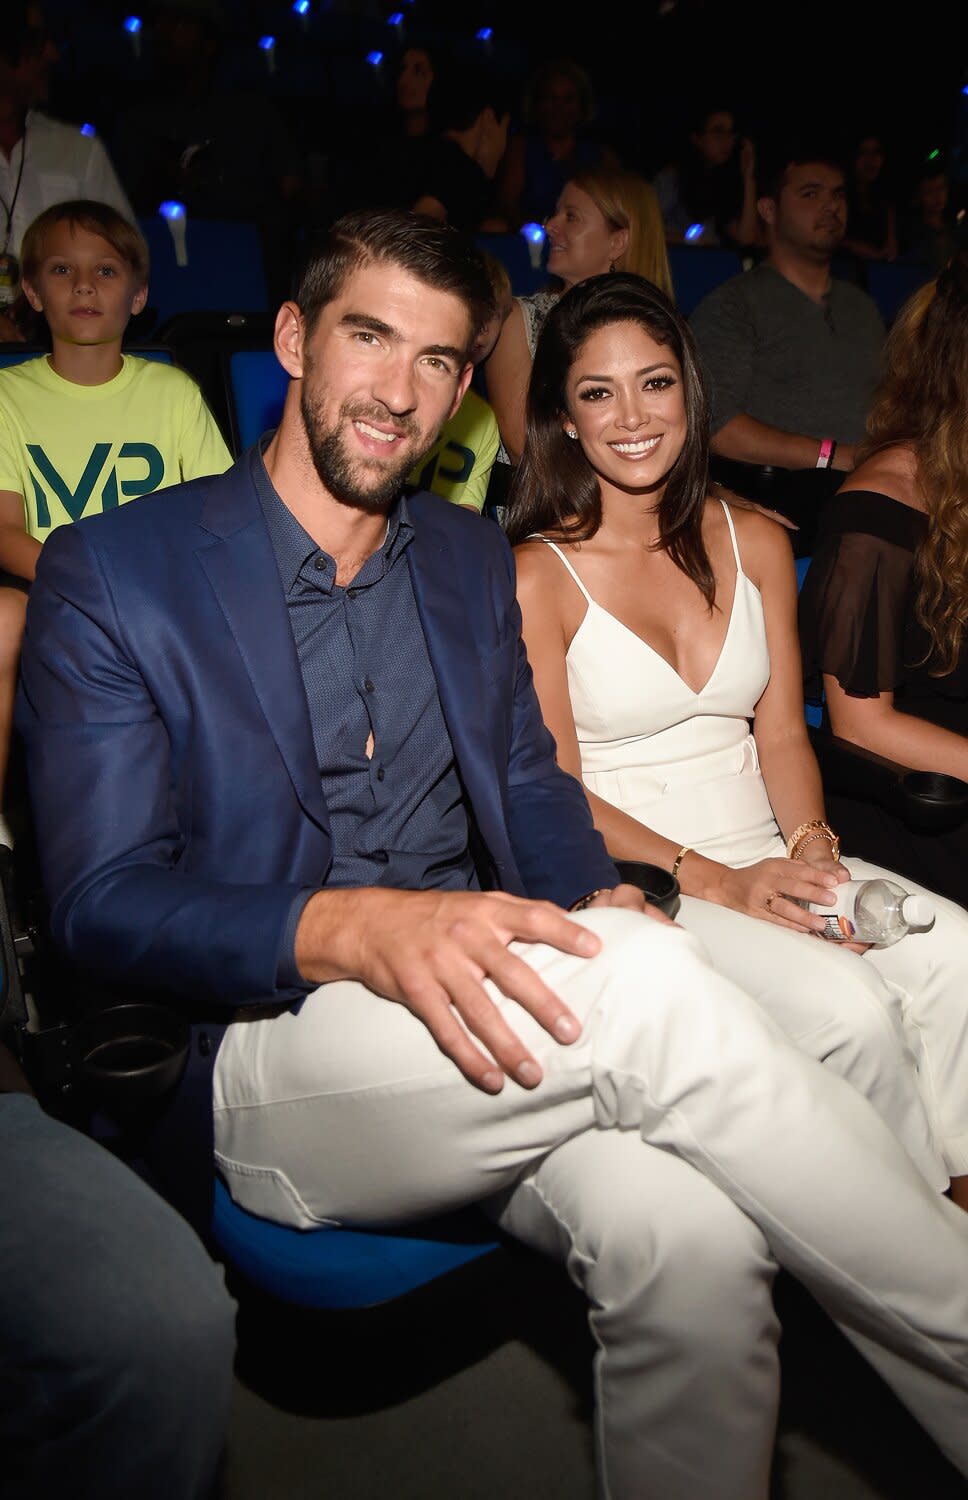 Honoree Michael Phelps (L) and model-Miss California USA 2010 Nicole Johnson attend Nickelodeon Kids' Choice Sports Awards 2017 at Pauley Pavilion on July 13, 2017 in Los Angeles, California